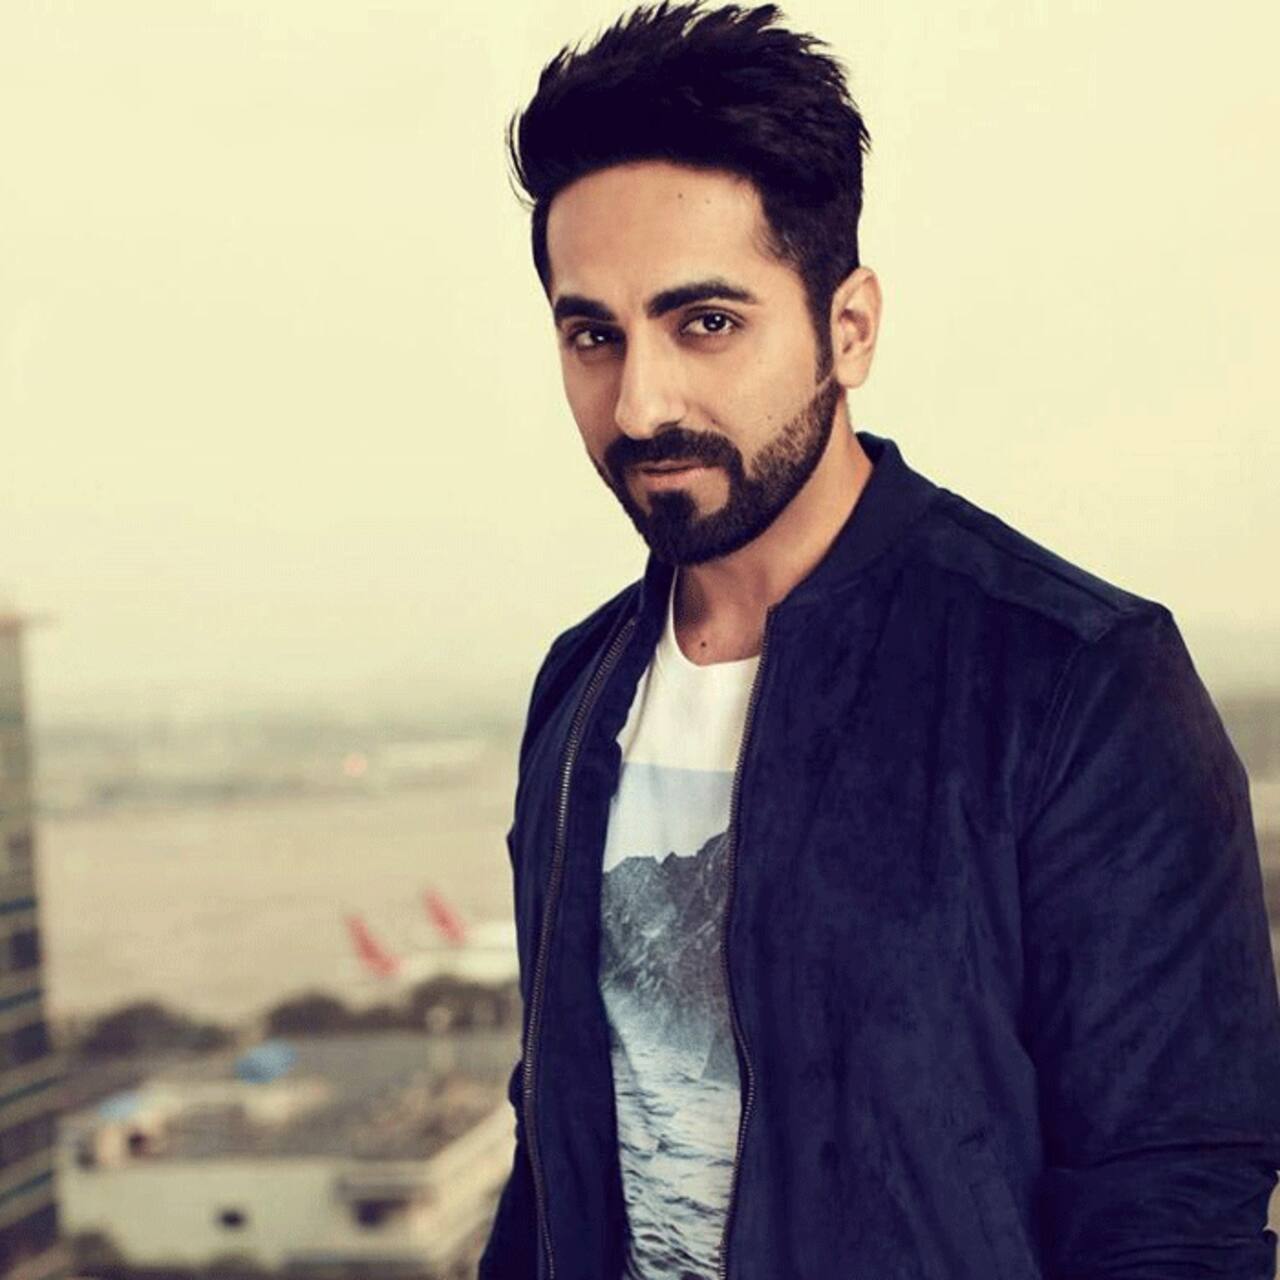 Filmy Friday: With Dream Girl, Gulabo Sitabo and Bala, Ayushmann Khurrana  is ready to entertain us with different genres - Bollywood News & Gossip,  Movie Reviews, Trailers & Videos at 